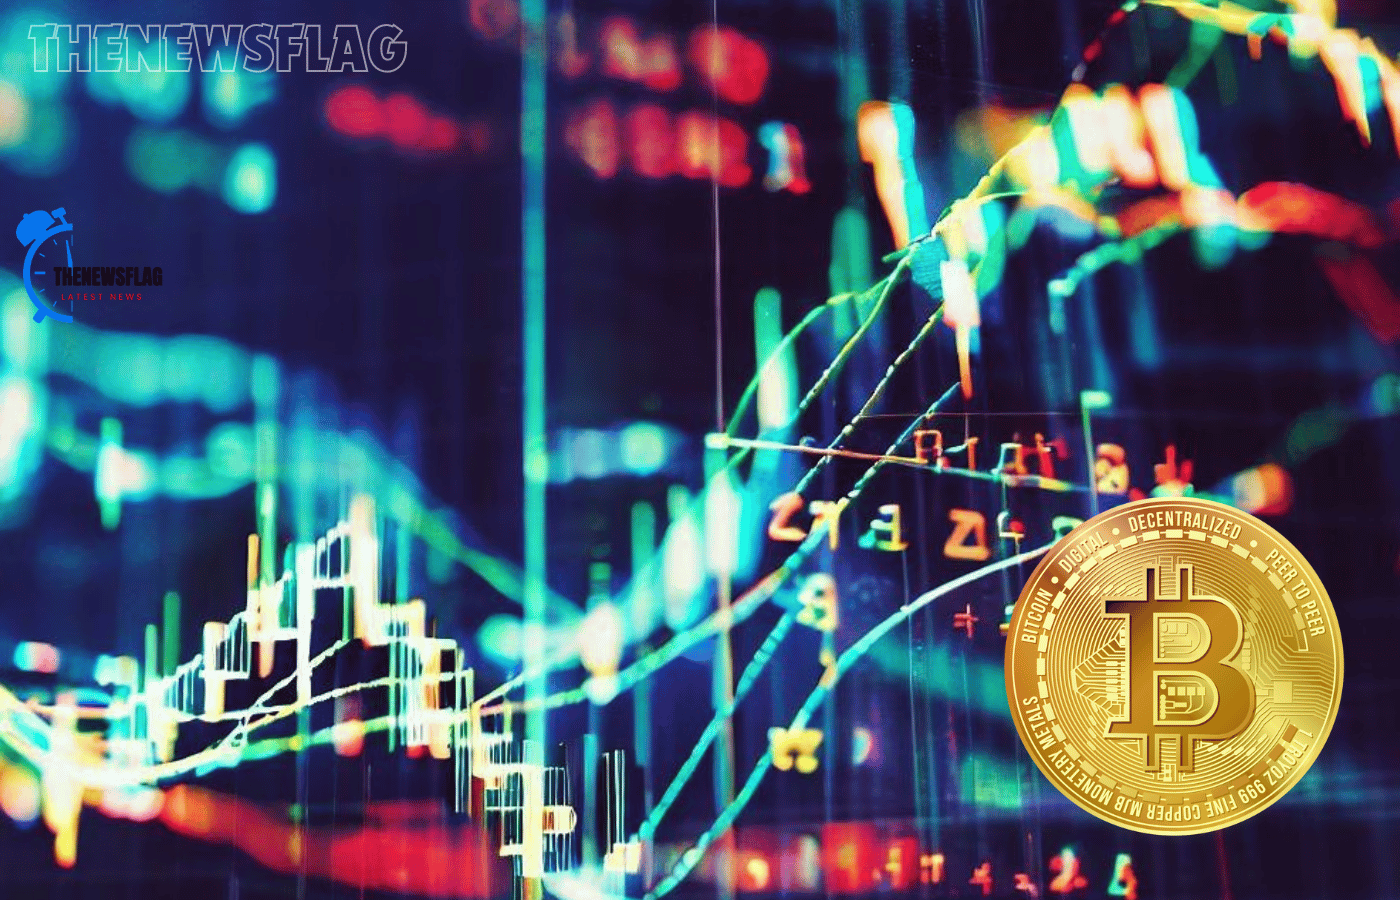 Bitcoin Dropped by $8K, Causing Crypto Markets to Lose $250 Billion Overnight (Market Watch)